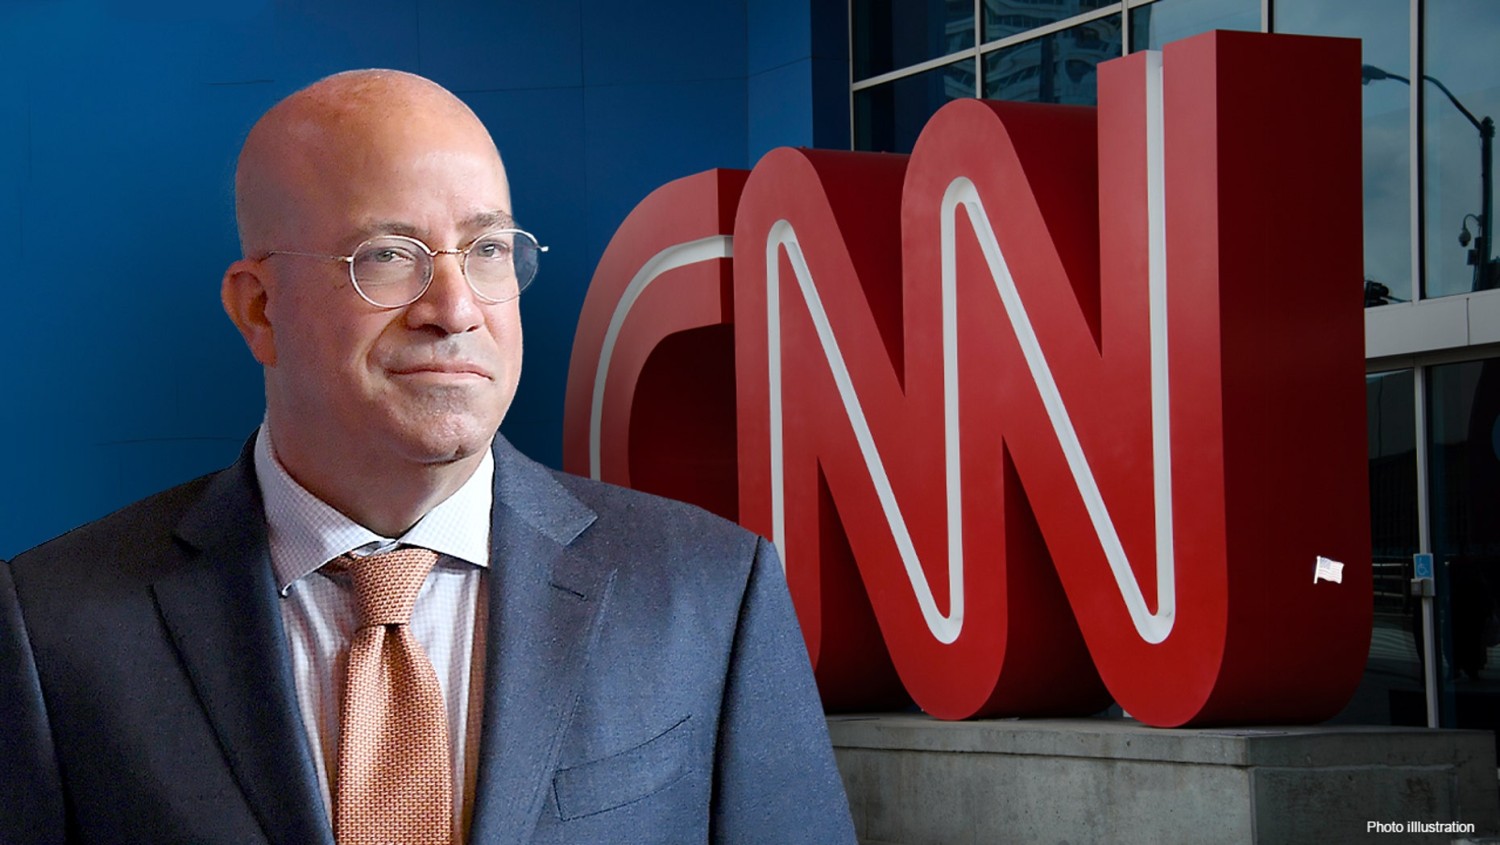 Embattled CNN boss Jeff Zucker walked away from the liberal network on Wednesday after failing to disclose a "consensual relationship" with a CNN staffer. (Getty Images)